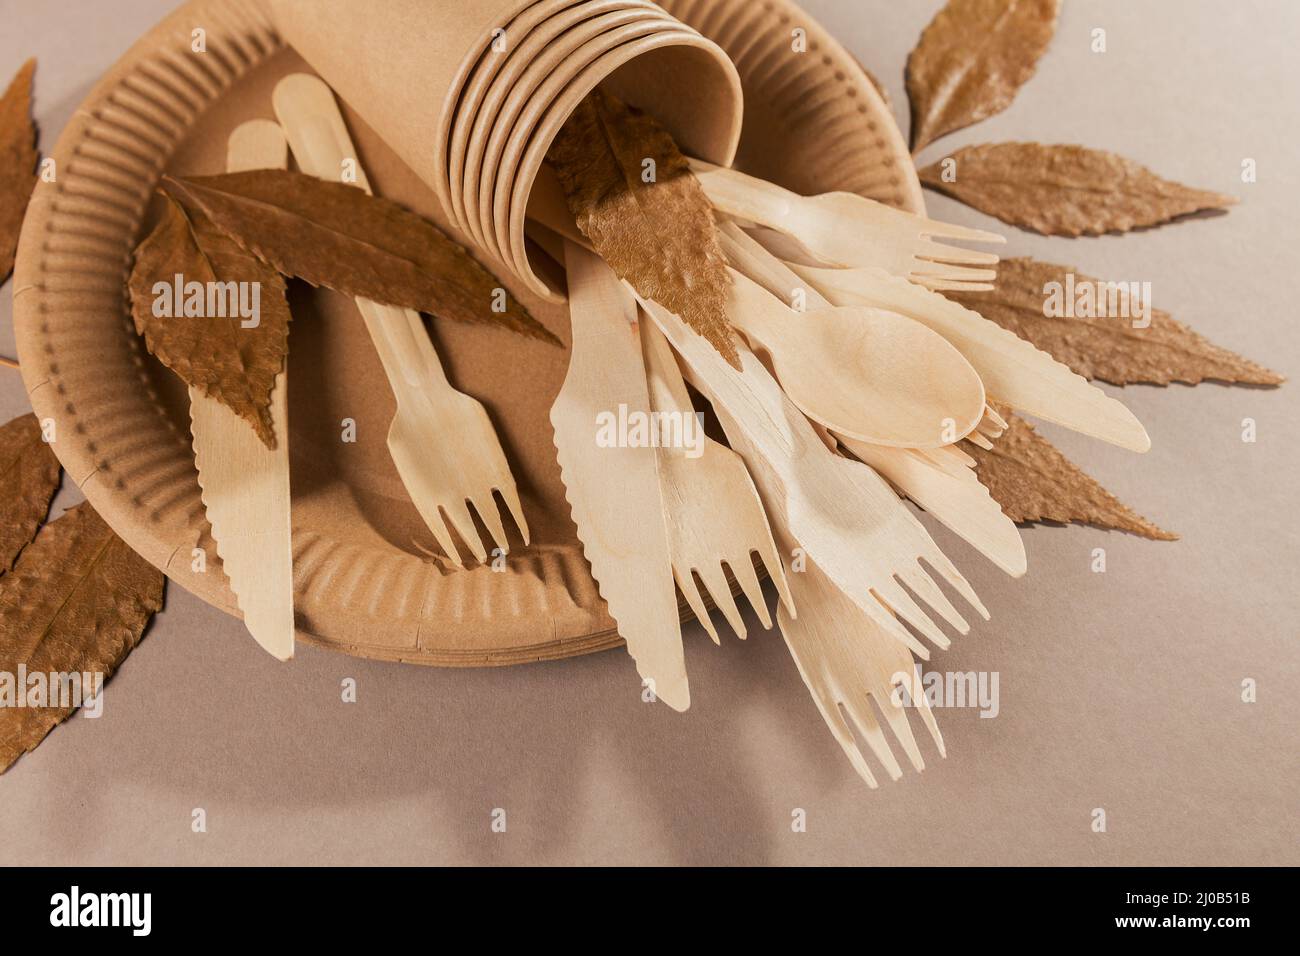 Eco-friendly disposable utensils made of bamboo wood and paper on a light beige background. Fork, knives, plates, paper cups and dry leaves Stock Photo